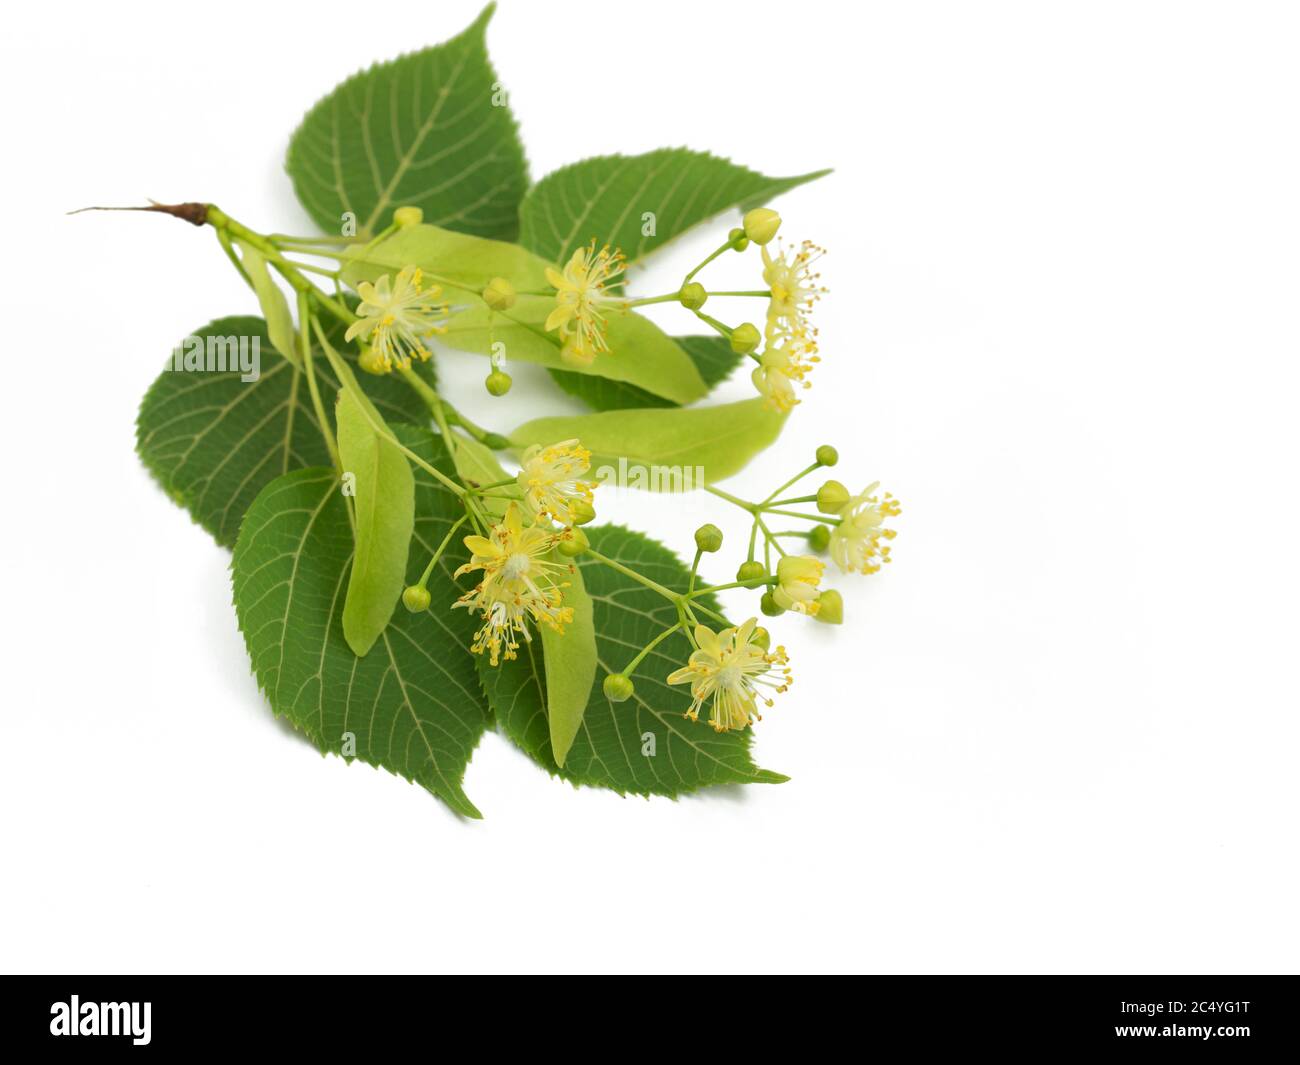 Linden flowers and leaves isolated against white background Stock Photo